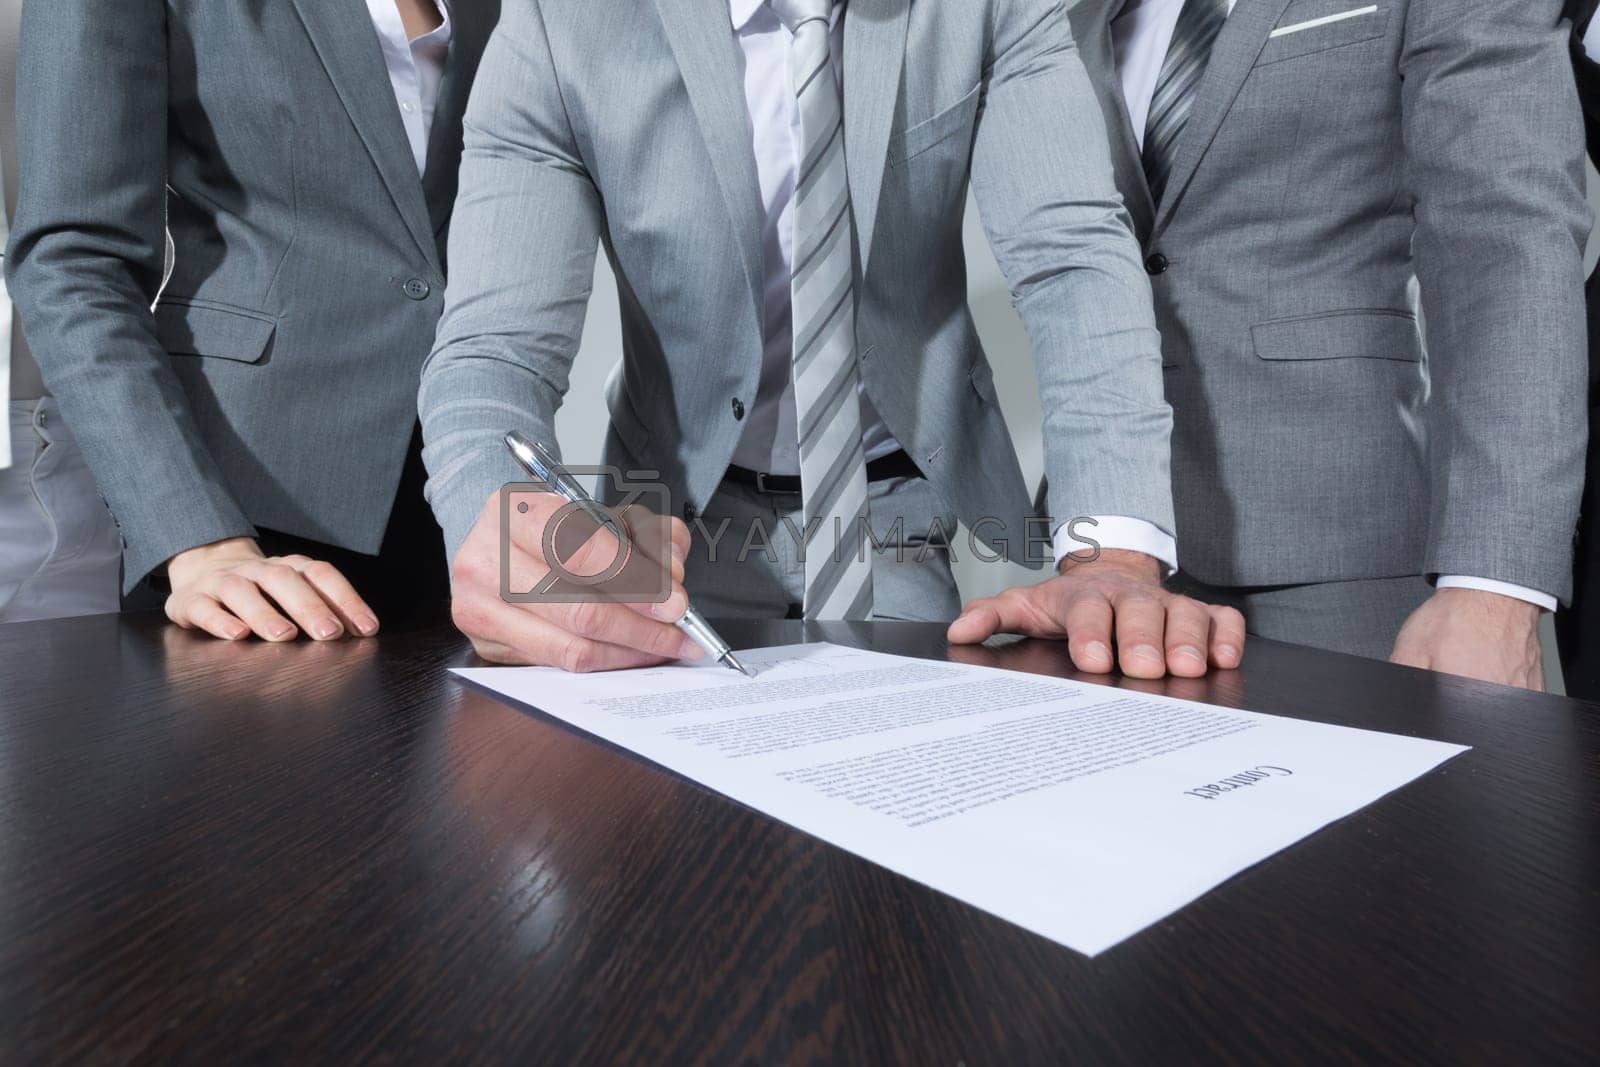 Royalty free image of Businessman signing contract by Yellowj